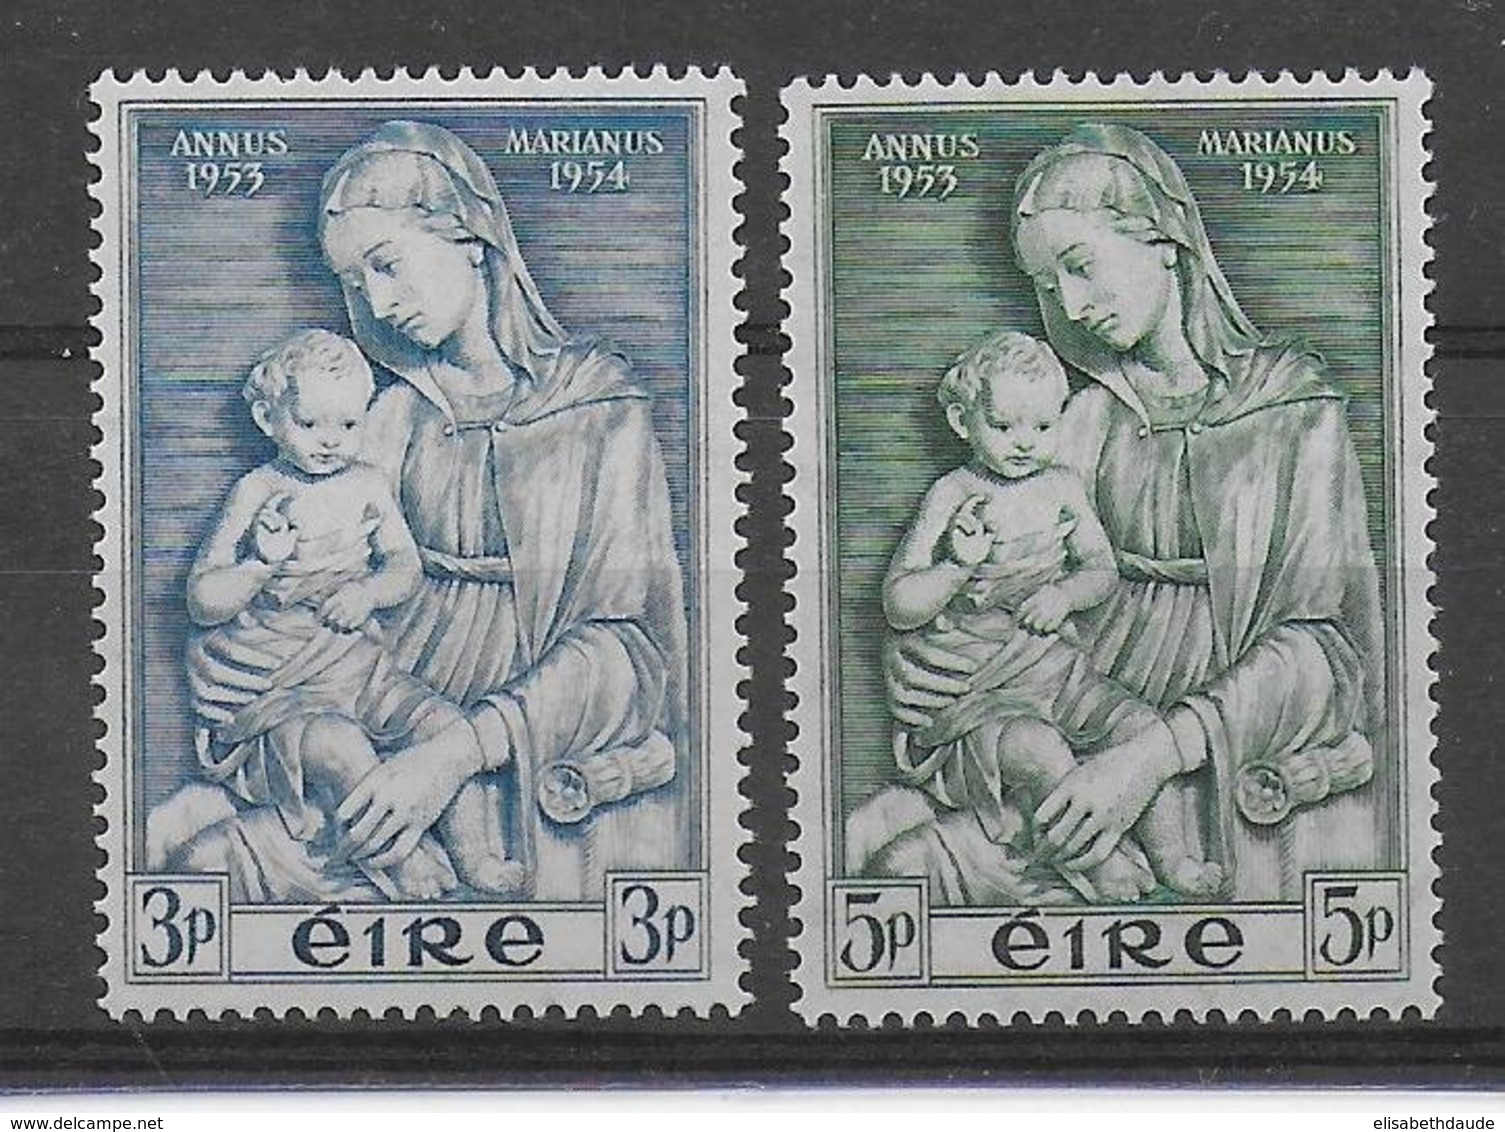 IRLANDE - YVERT N°122/123 * MLH CHARNIERE QUASI INVISIBLE - COTE = 10 EUR. - Unused Stamps